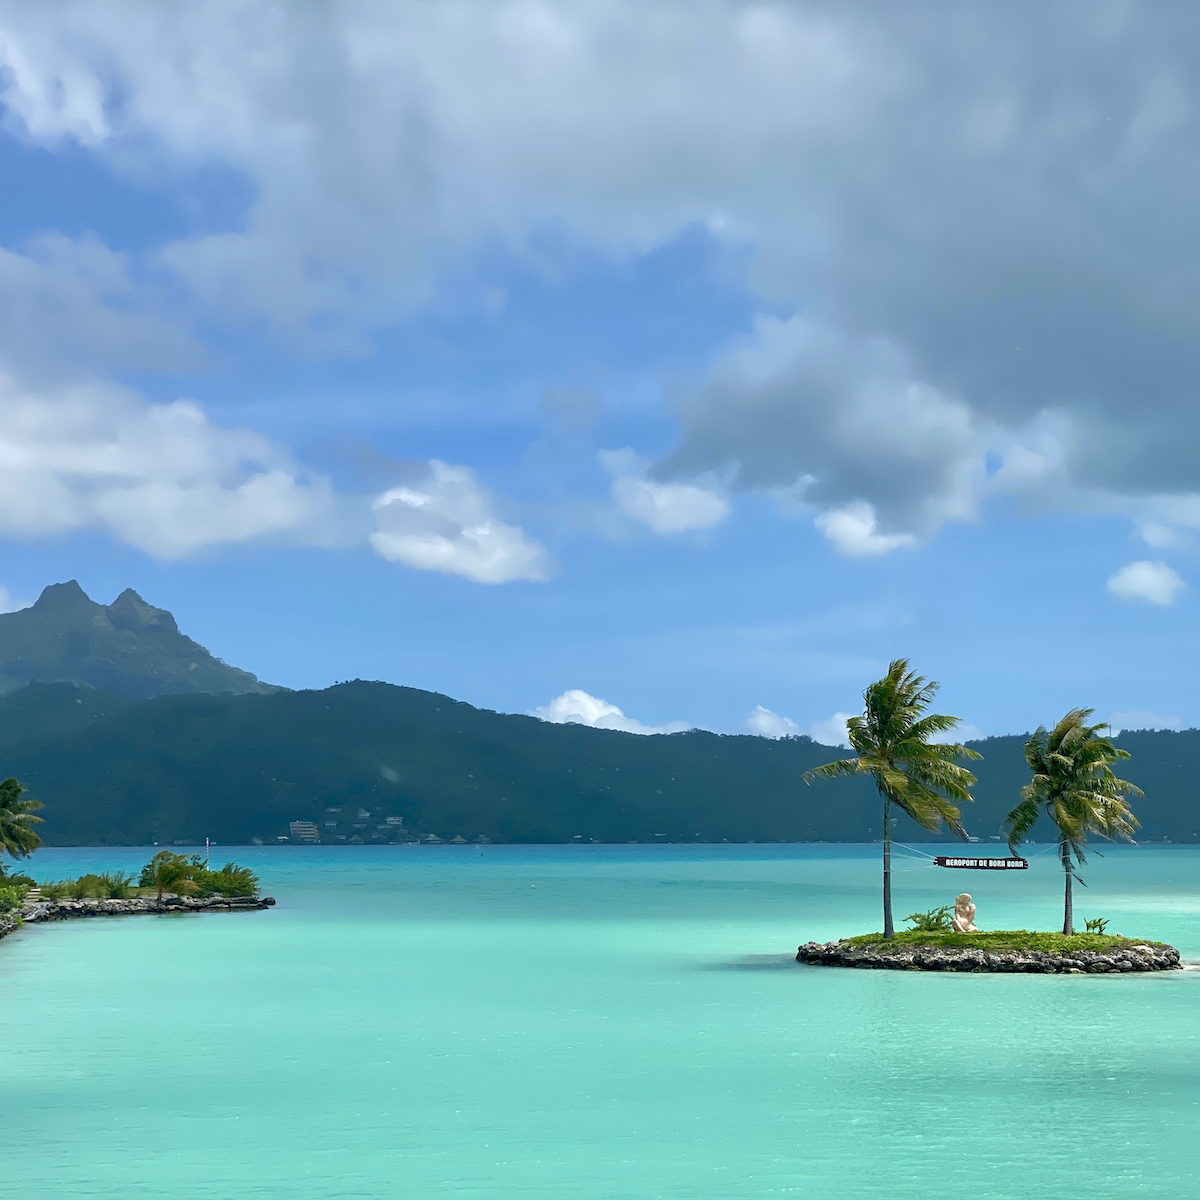 The lagoon view from the Bora Bora airport is breathtaking.